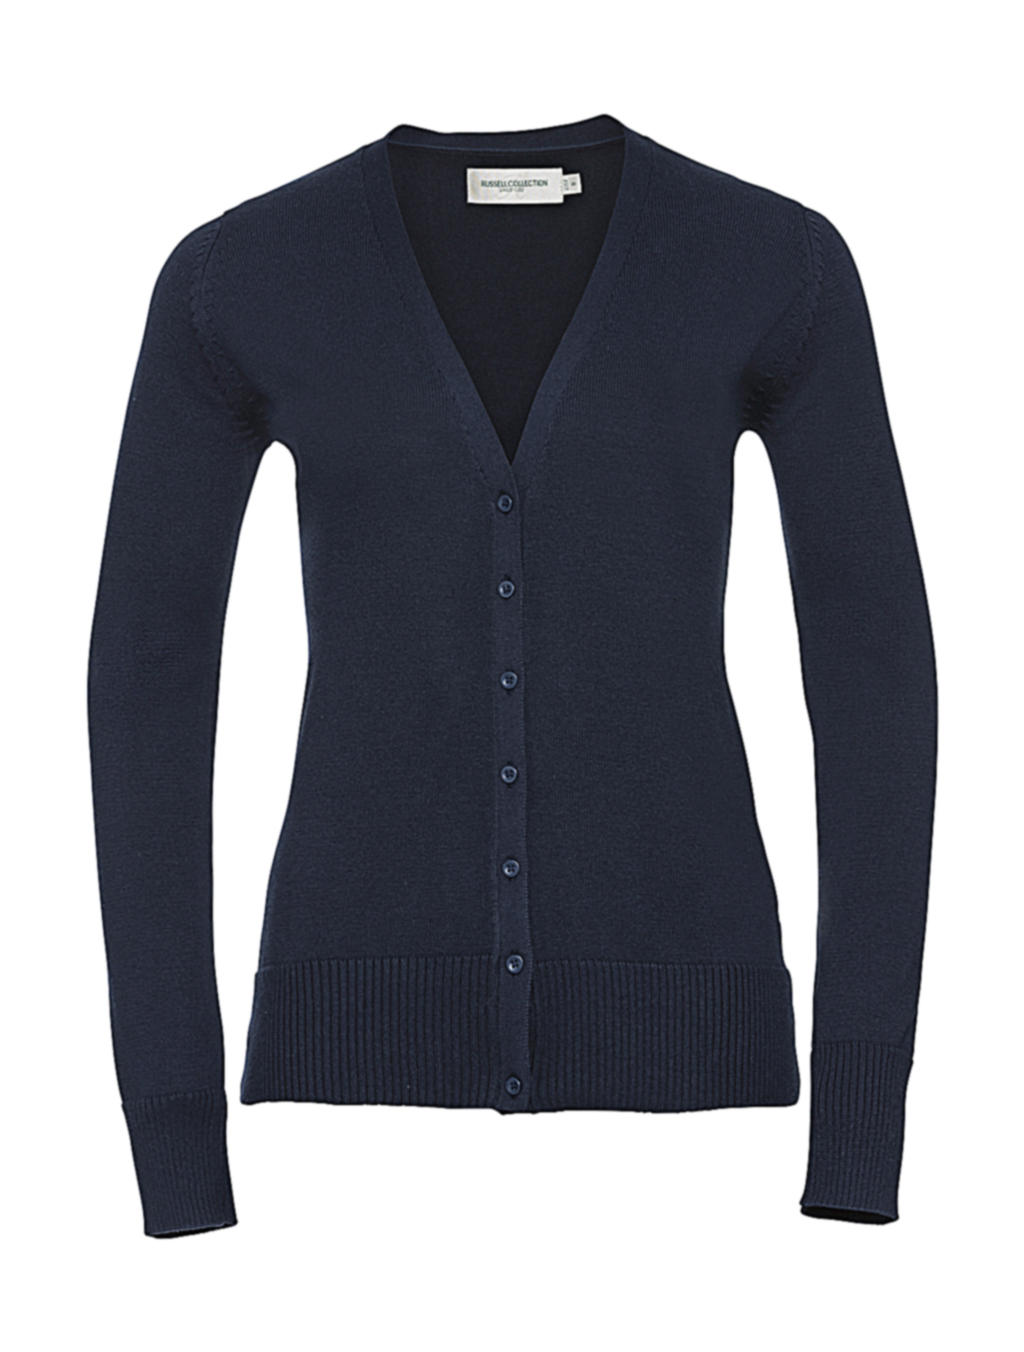  Ladies V-Neck Knitted Cardigan in Farbe French Navy